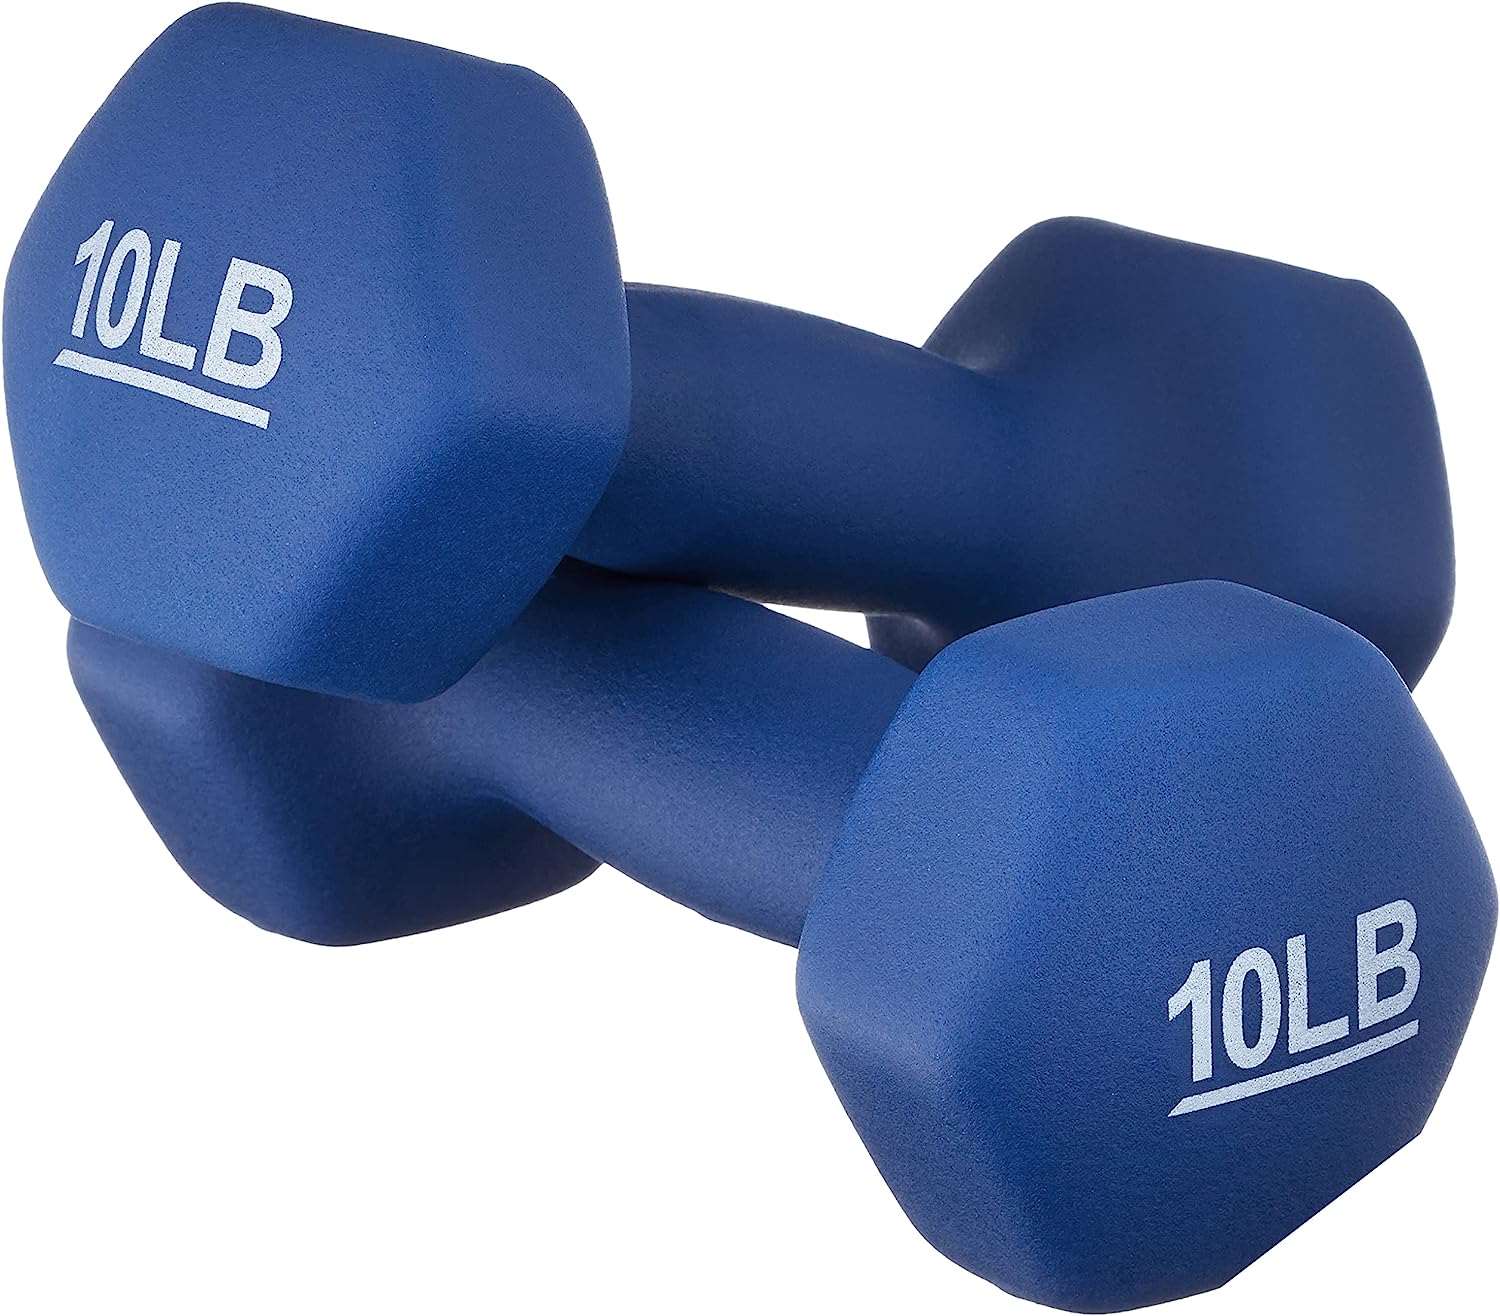 Amazon Basics Neoprene Workout Dumbbell About this item 10 pound dumbbell (set of 2) for exercise and strength training Neoprene coating in Navy Blue offers long lasting durability Hexagon shaped ends prevent dumbbells from rolling away and offer stay-in-place storage Nonslip grip promotes a comfortable, secure hold Available in multiple sizes to mix and match for specific workout needs and to expand on over time Printed weight number on each end cap and color coded for quick identification 